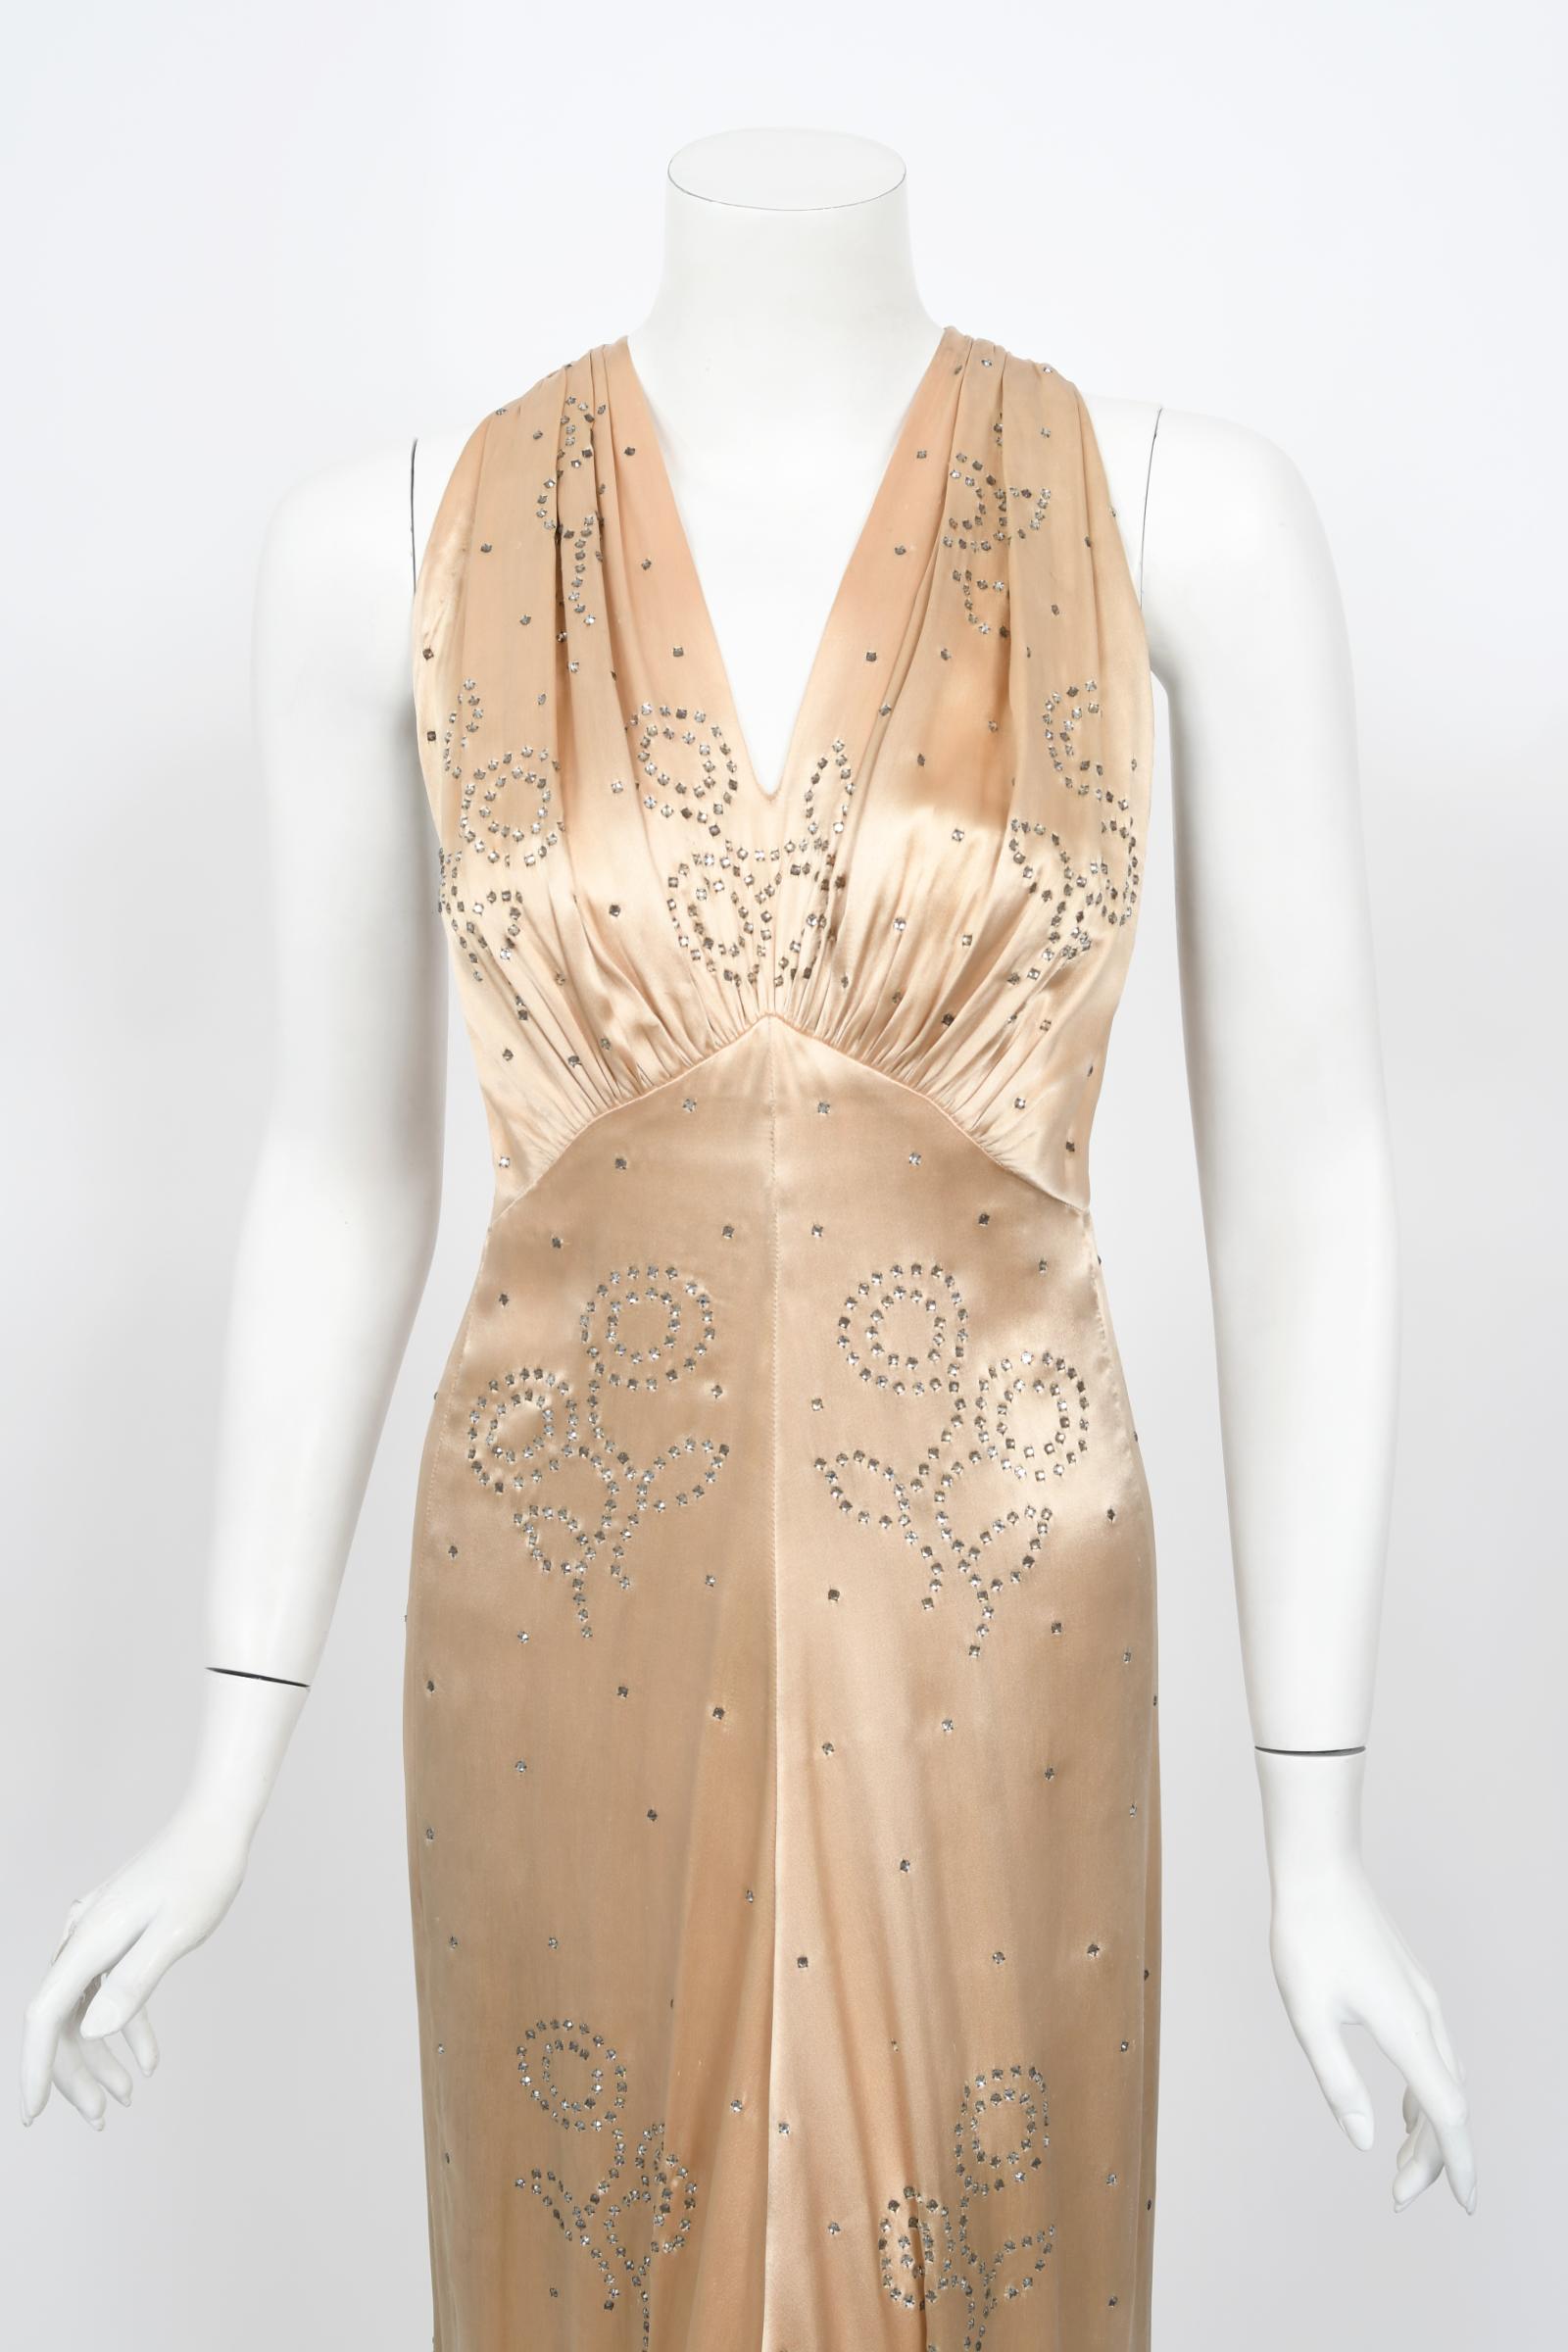 A breathtaking candlelight blush silk satin gown dating back to the mid 1930's Old Hollywood era of glamour. So Ginger Rodgers! I have never seen such a romantic design; hundreds of sparkling prong-set rhinestones in an alluring deco floral motif.